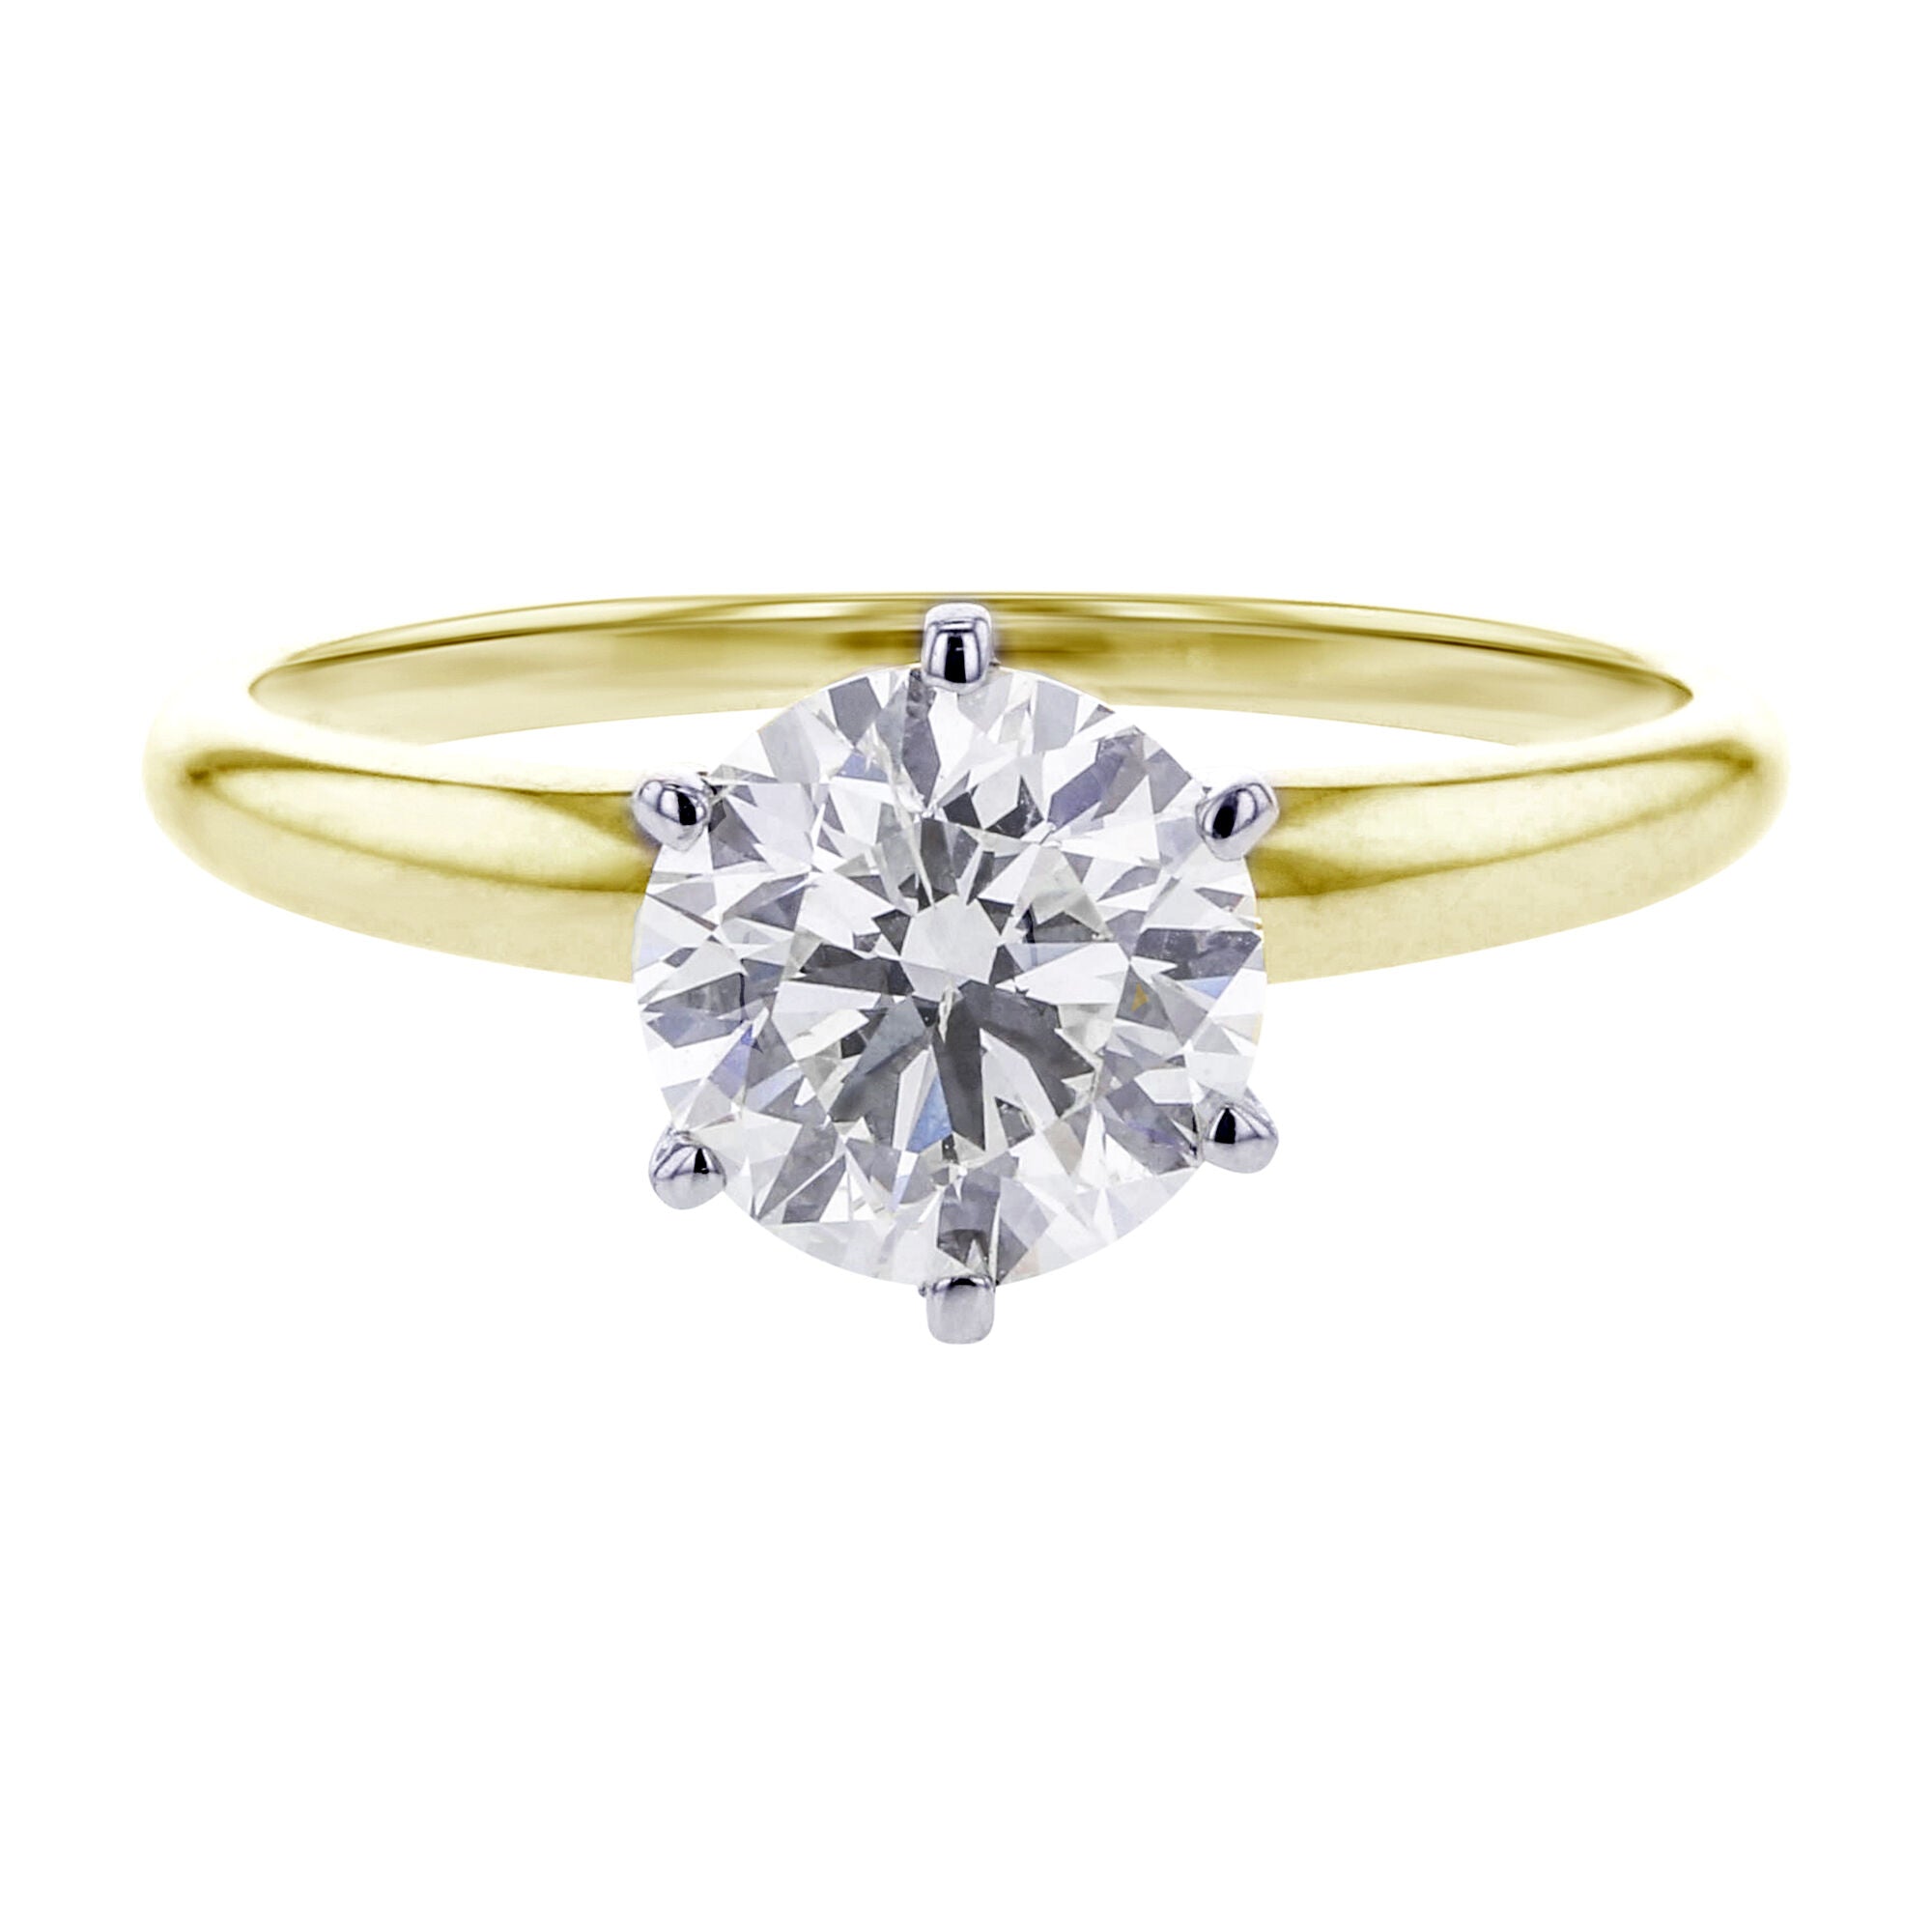 Christa Ready For Love Diamond Engagement Ring 1 1/2CT